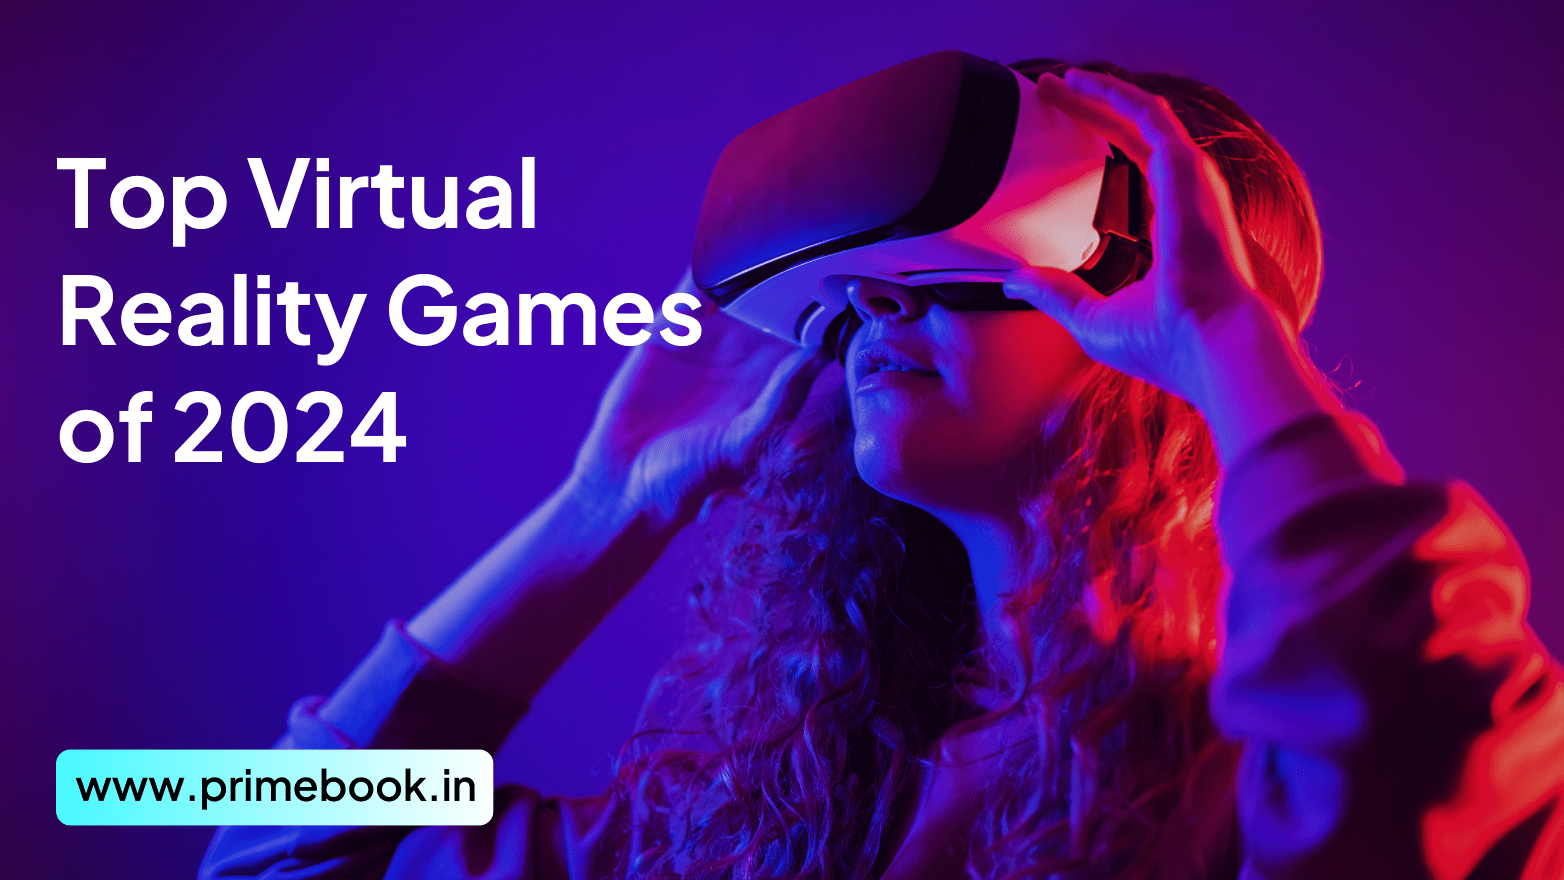 Explore The Top Virtual Reality Games of 2024